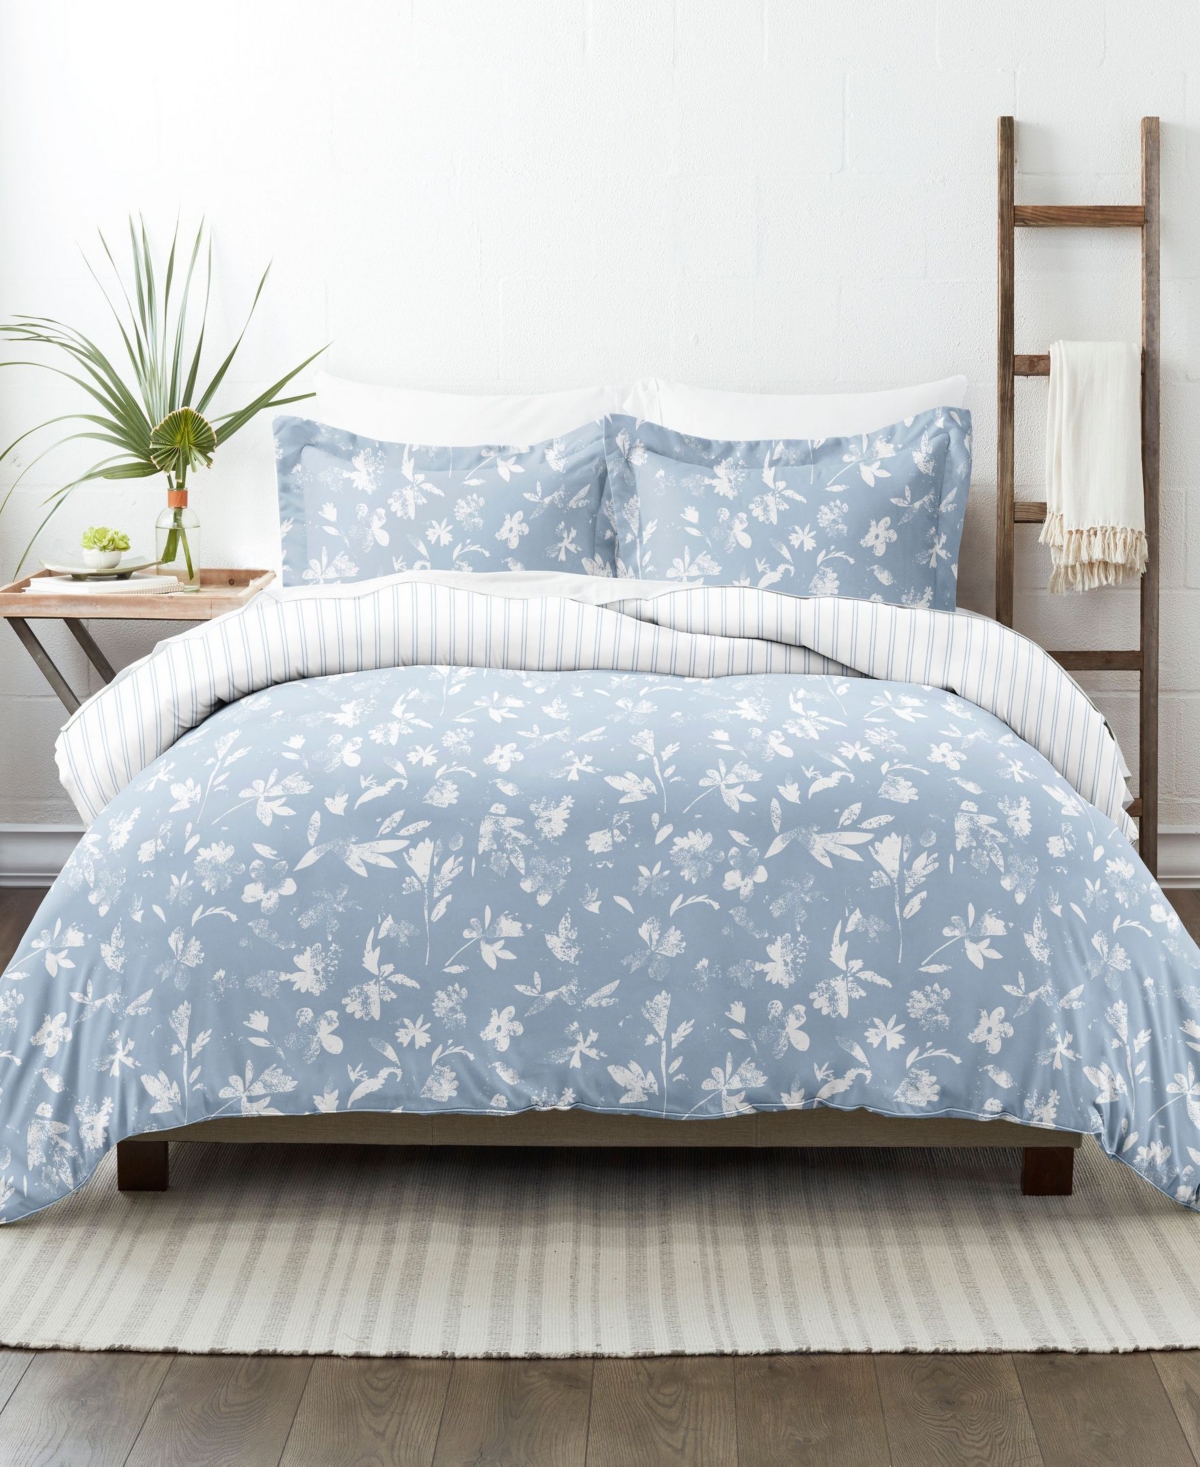 Ienjoy Home Home Collection Premium Ultra Soft 3 Piece Reversible Duvet Cover Set, Full/queen In Light Blue